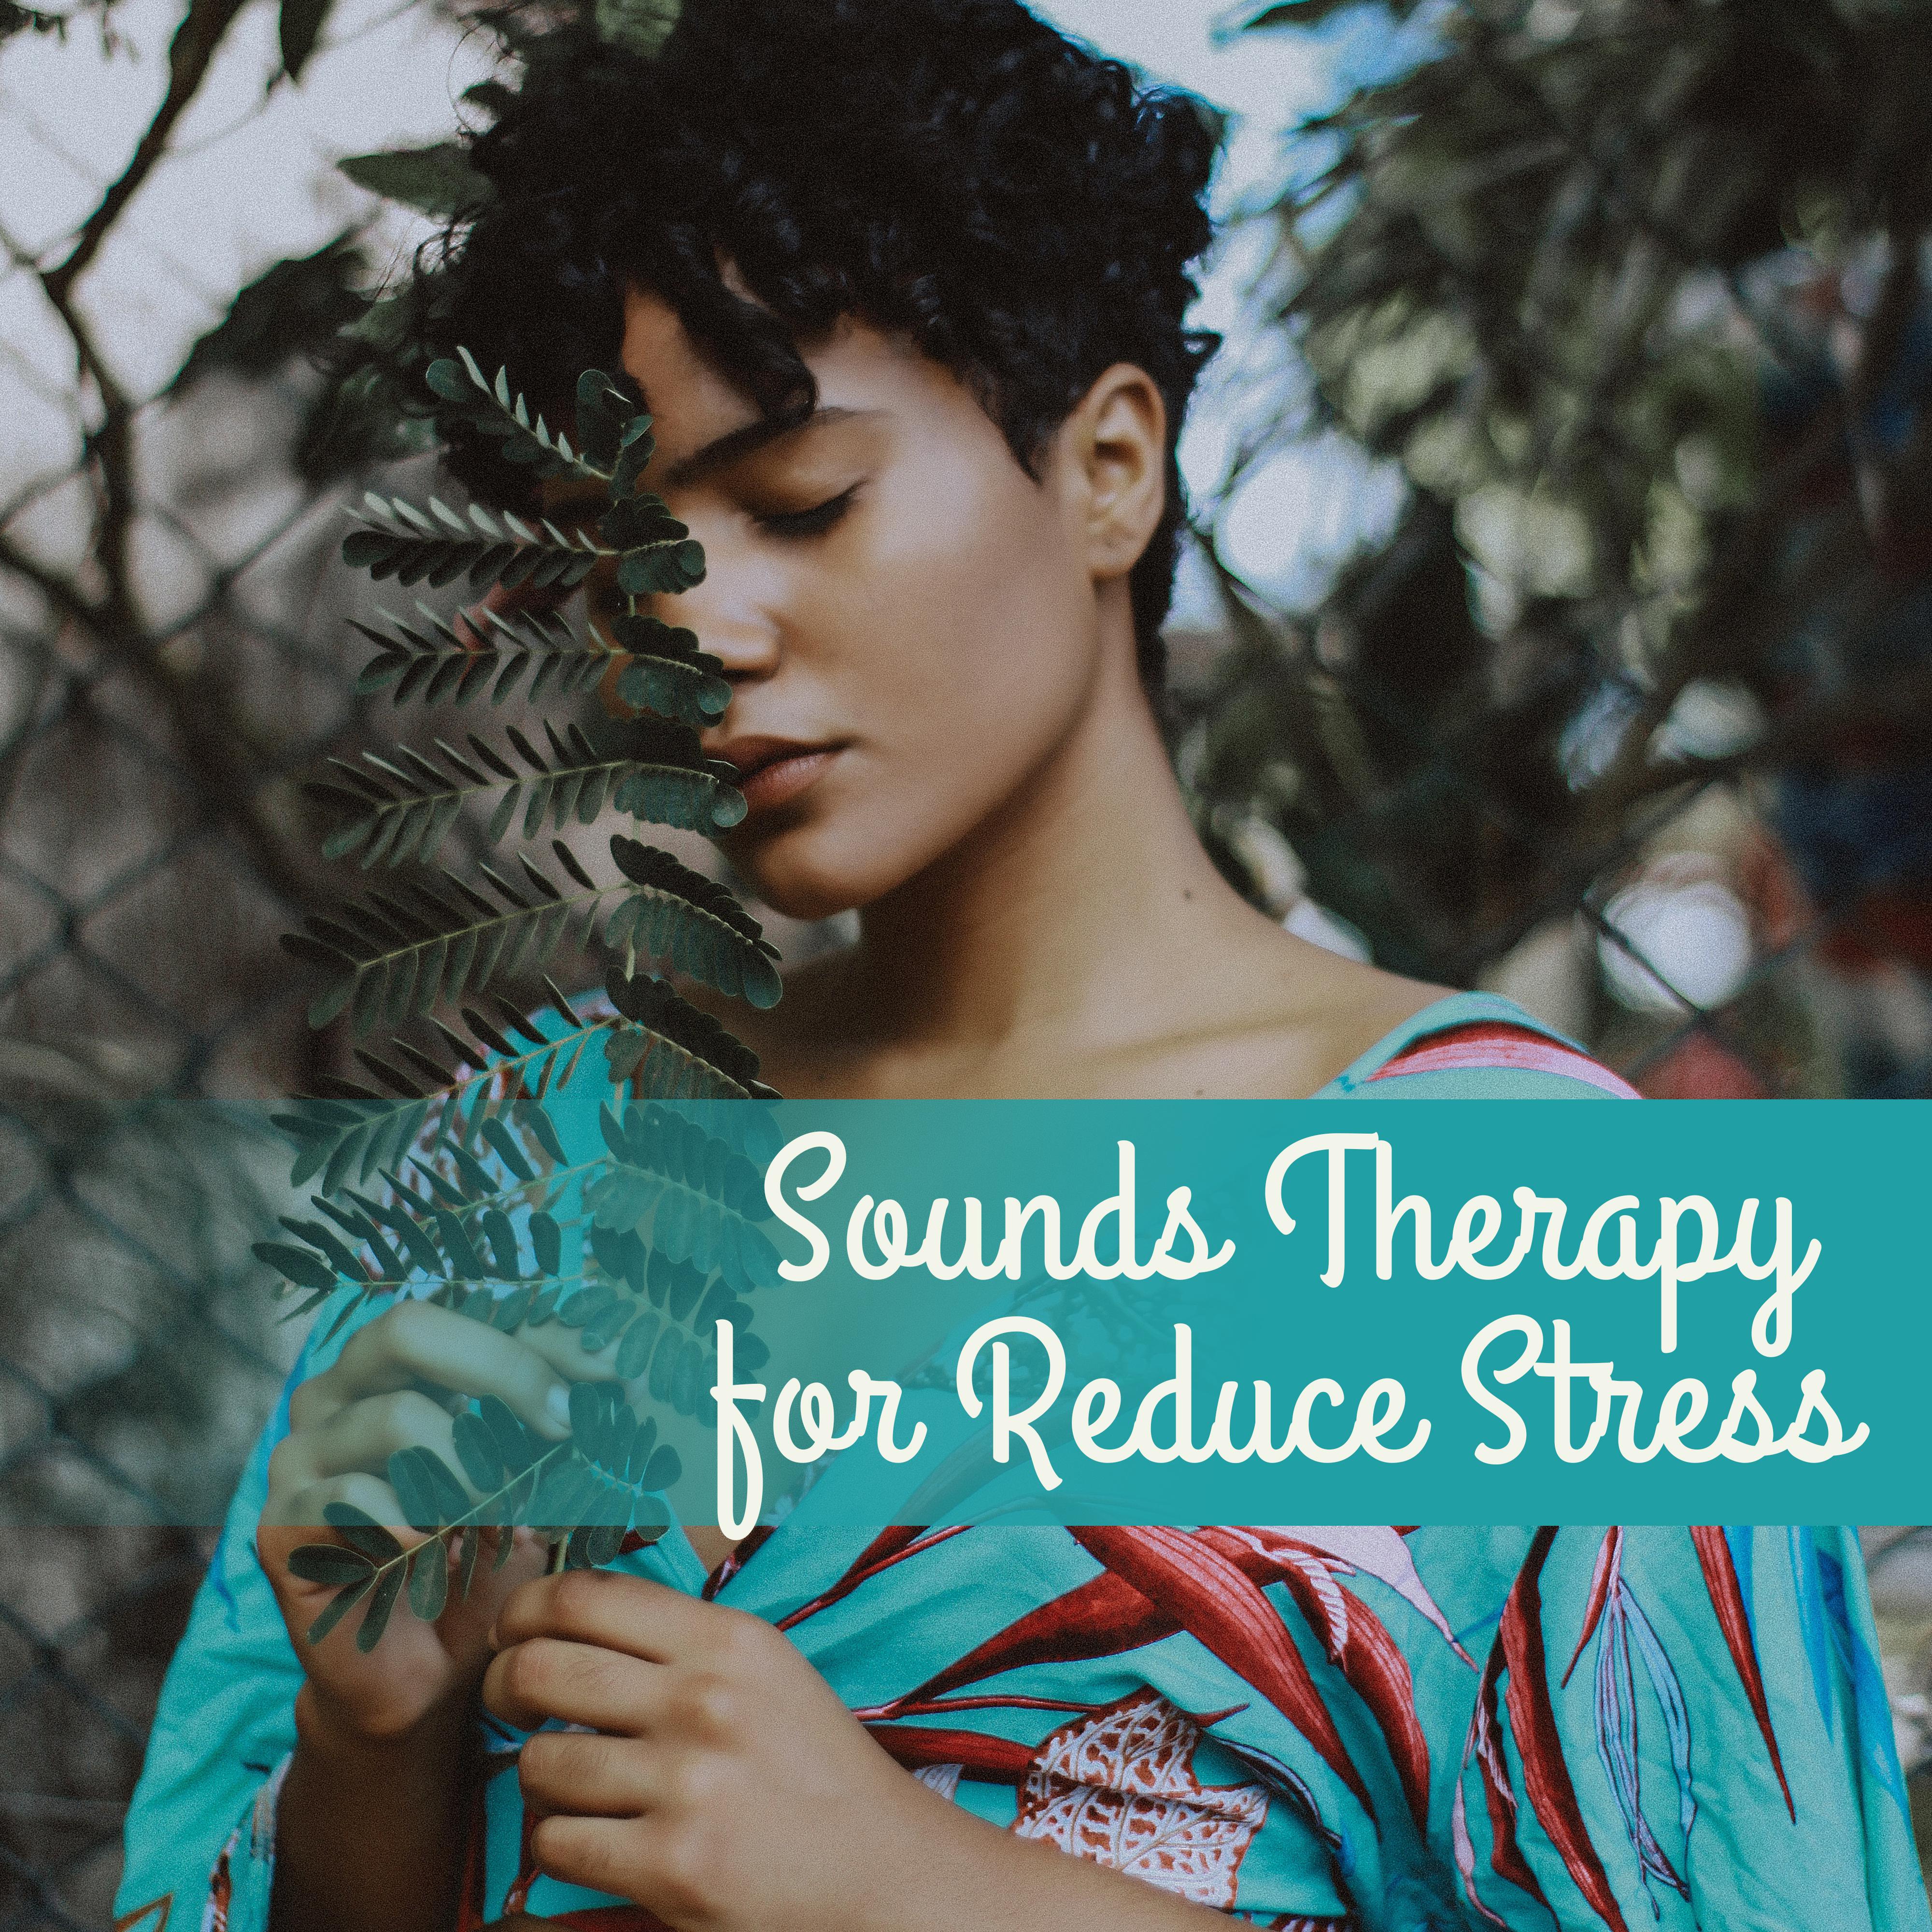 Sounds Therapy for Reduce Stress